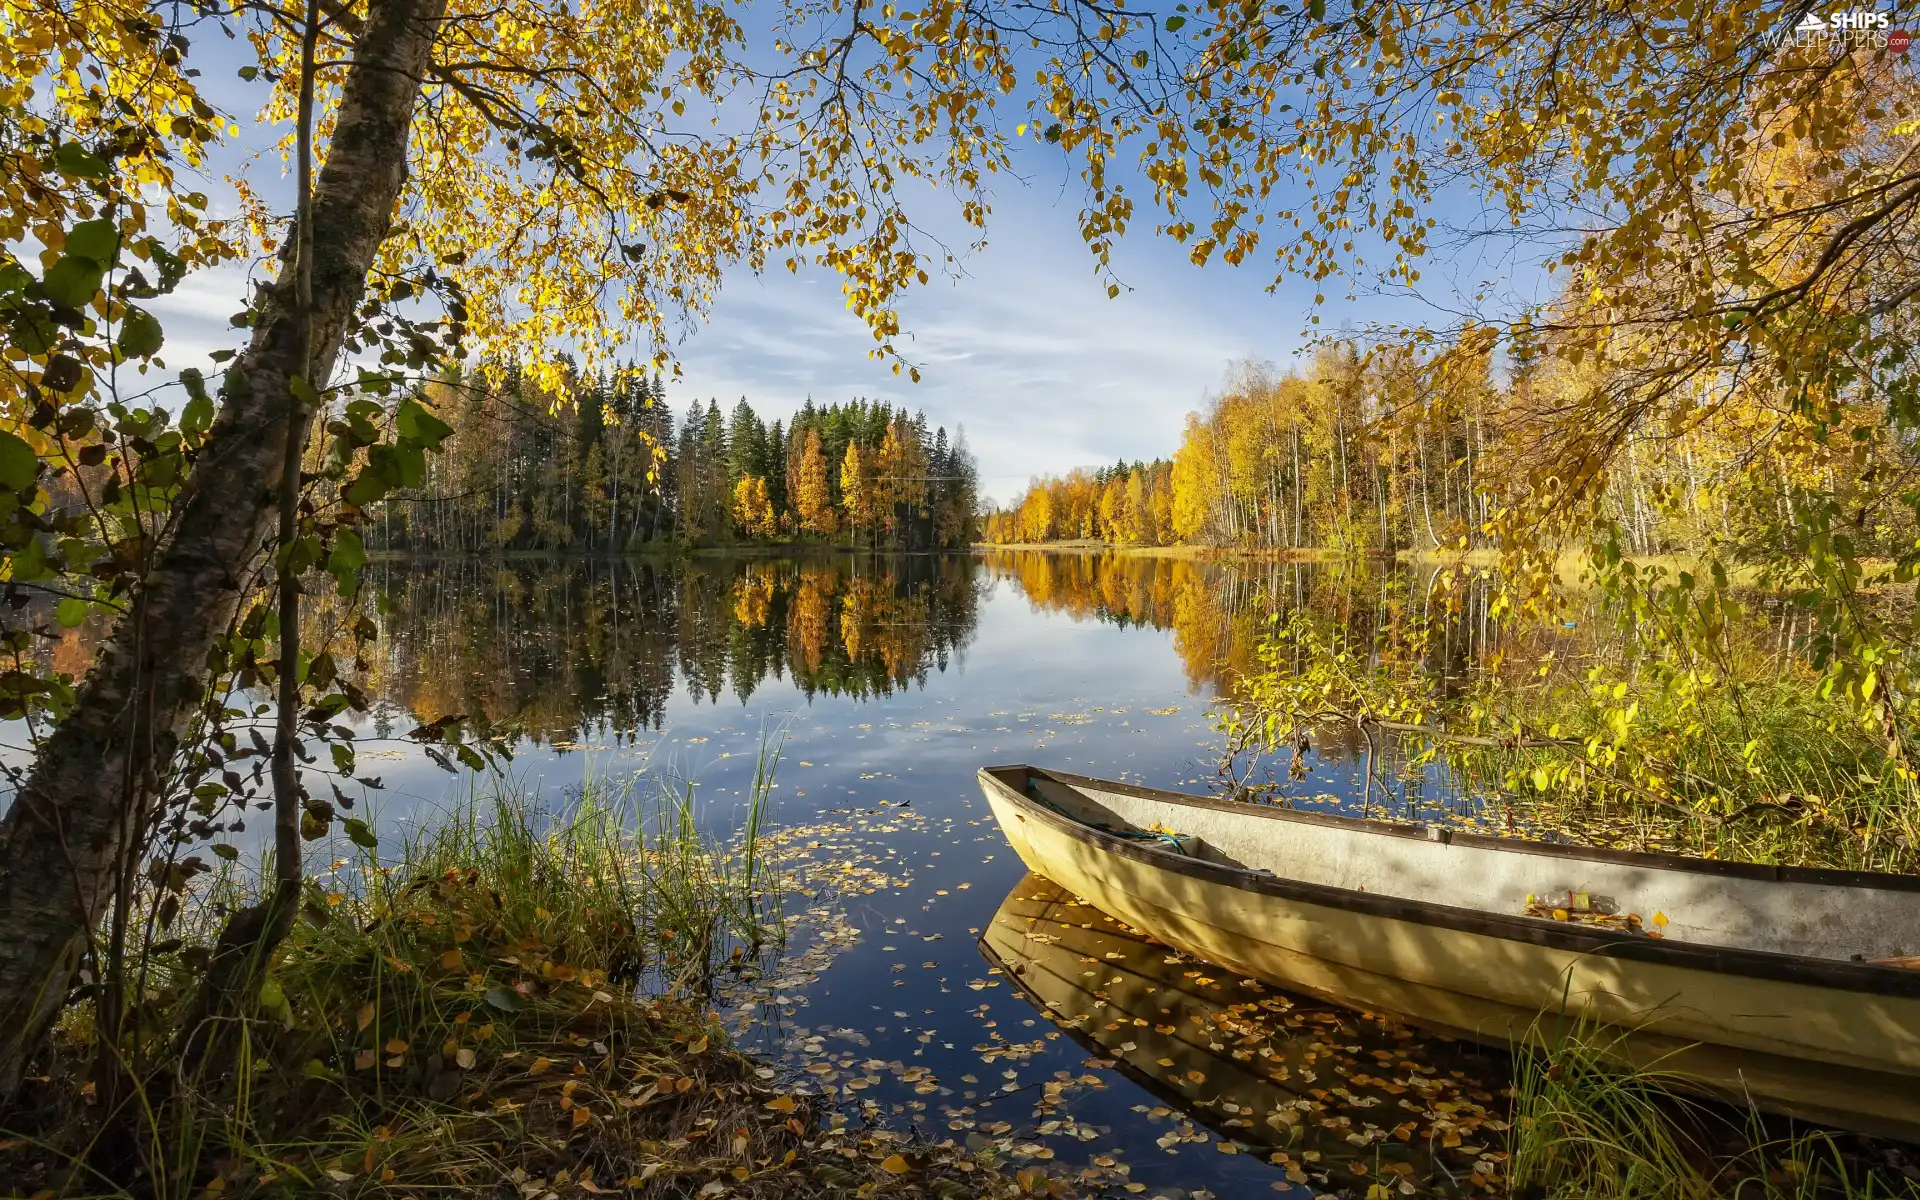 Boat, lake, trees, viewes, sunny, day, forest, autumn, birch